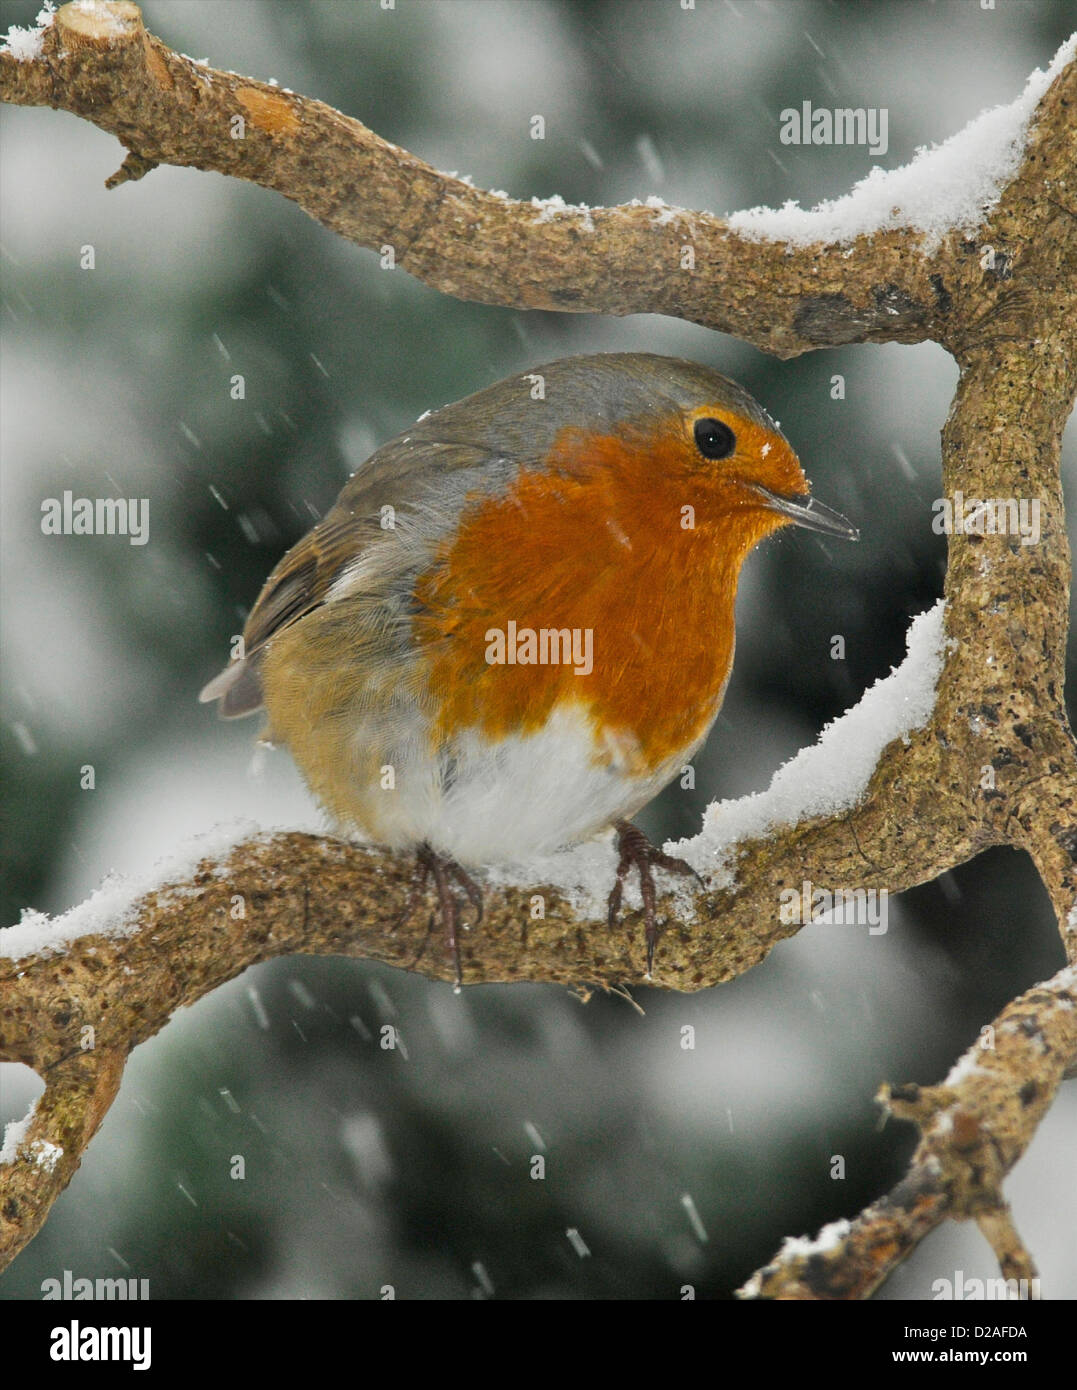 Petworth, Sussex. 18th Jan, 2013. Wild birds including this Robin (Erithaccus rubelica) in Petworth, Sussex, are starving as snow blankets large areas of the UK to a depth of several inches. Stock Photo